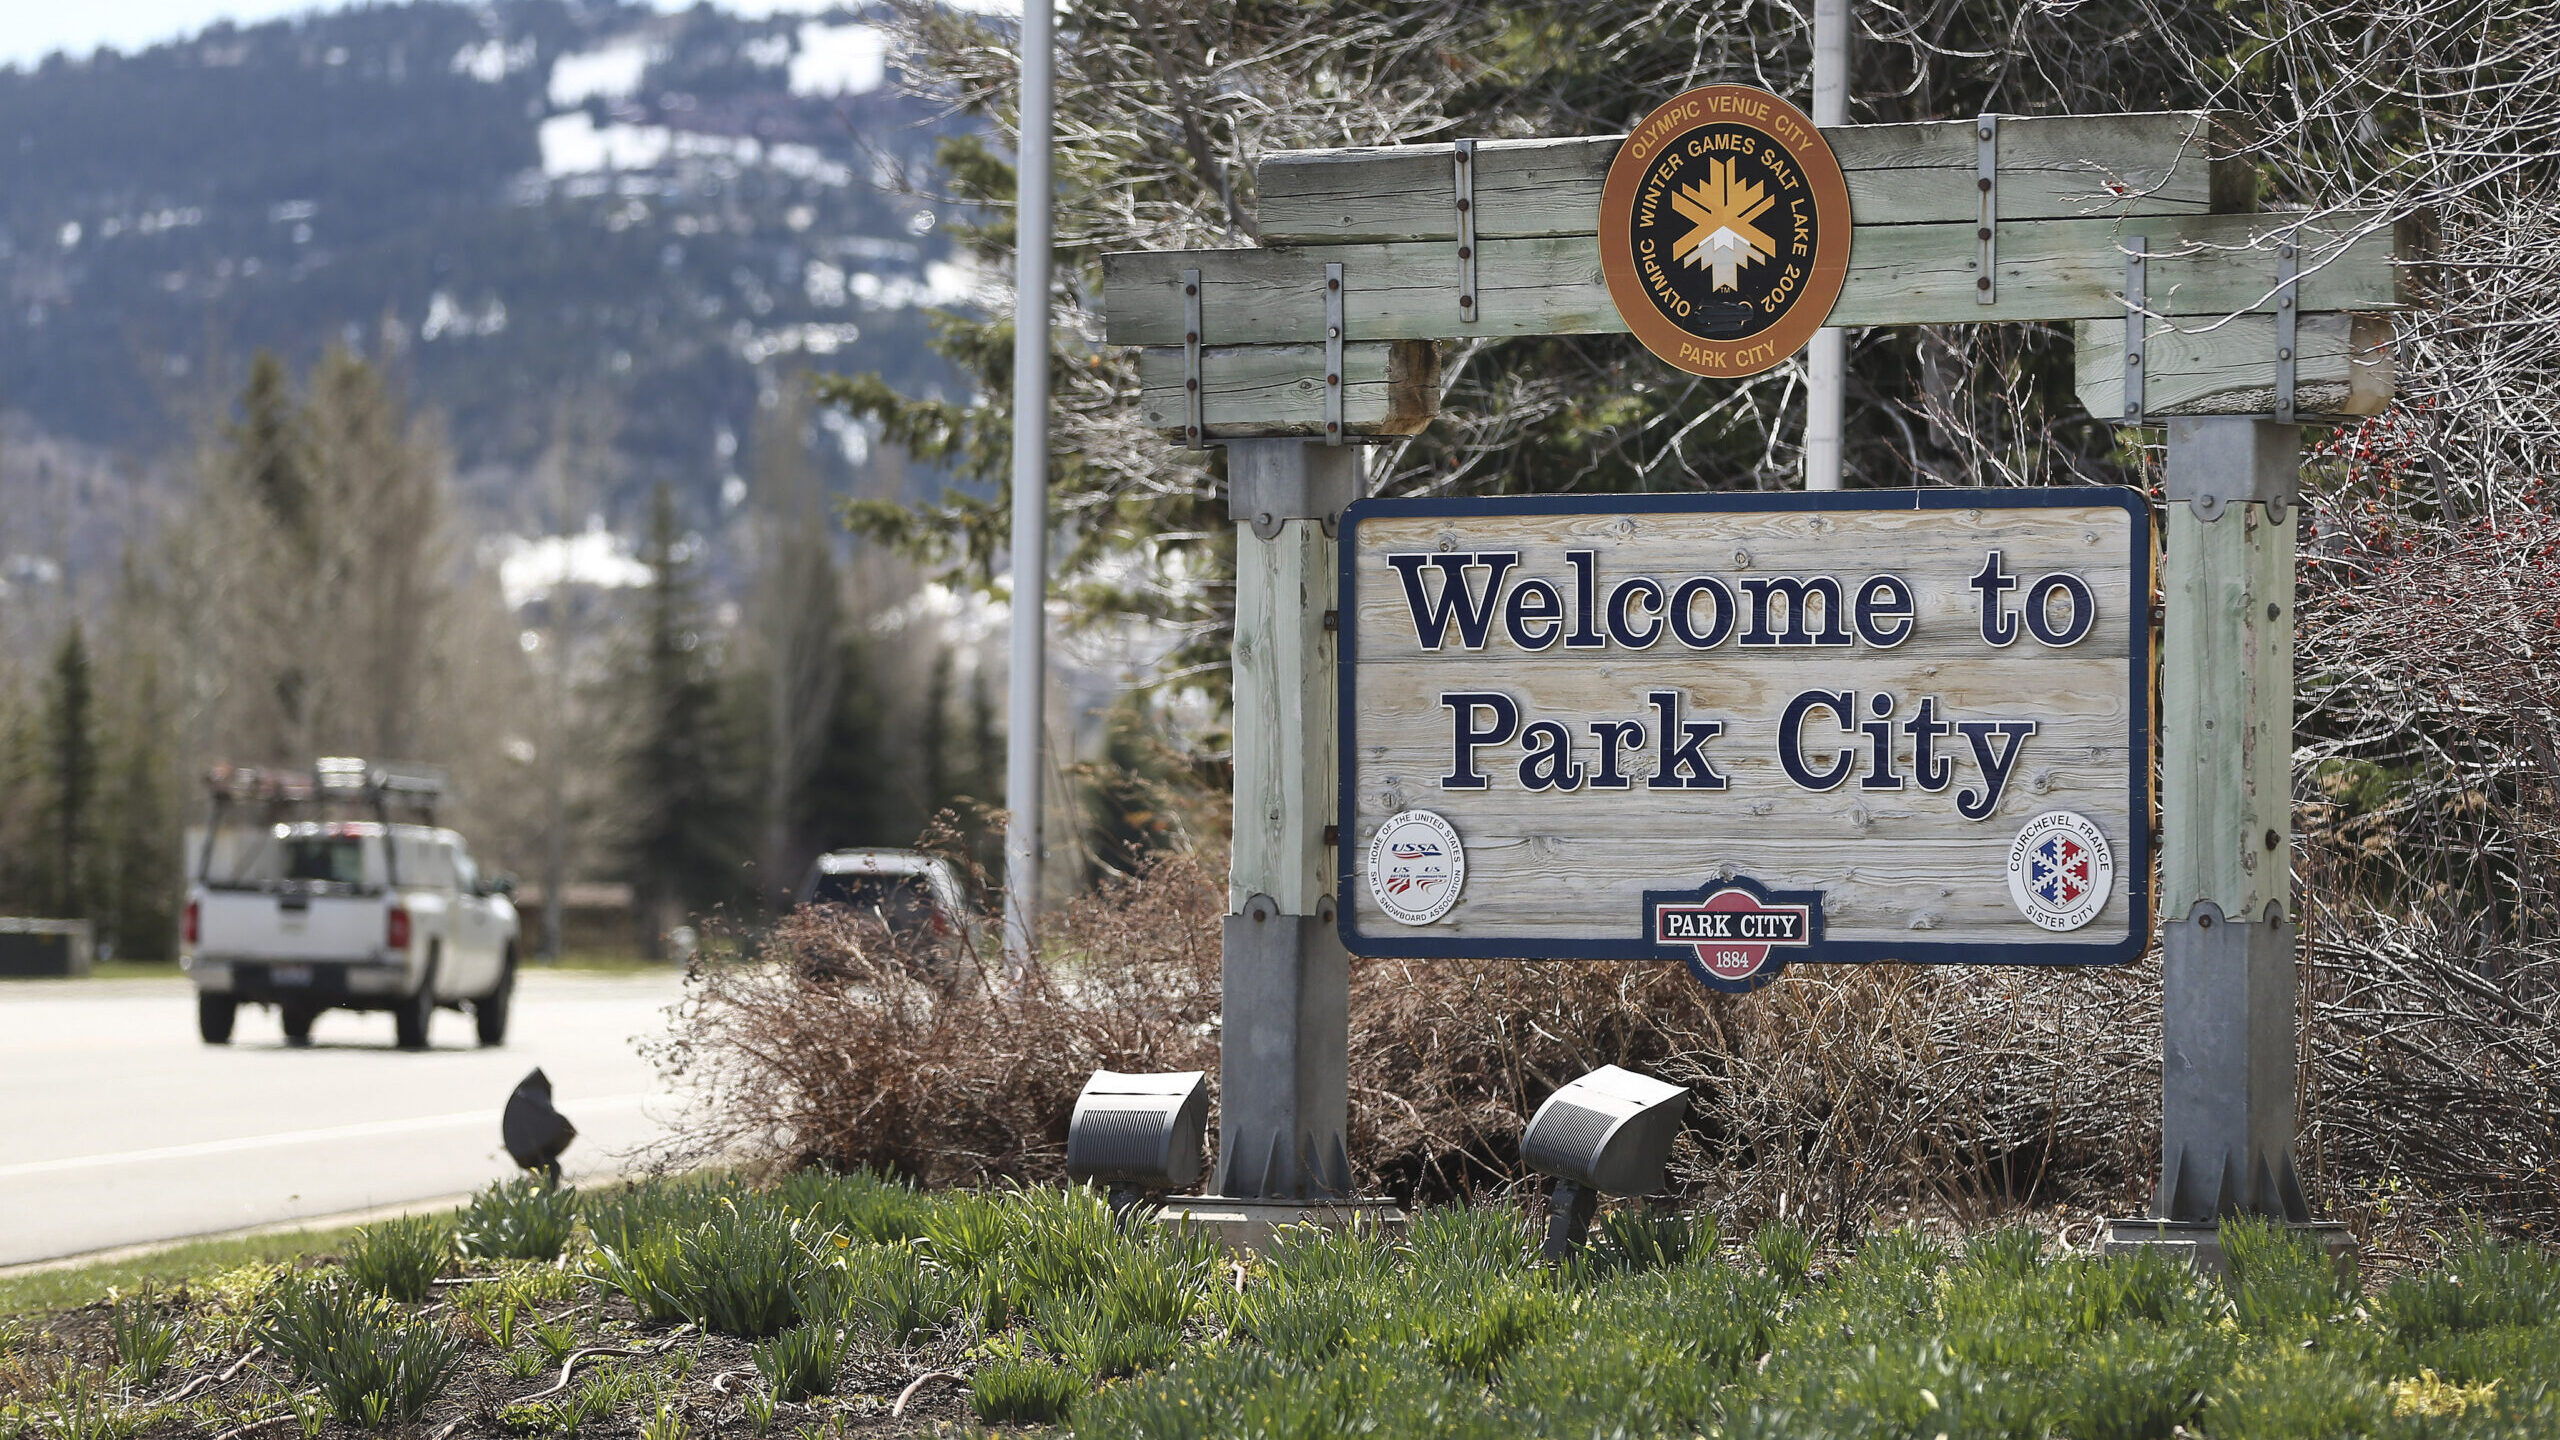 park city welcome sign is pictured, the city is hosting the park city cardboard sled derby tomorrow...